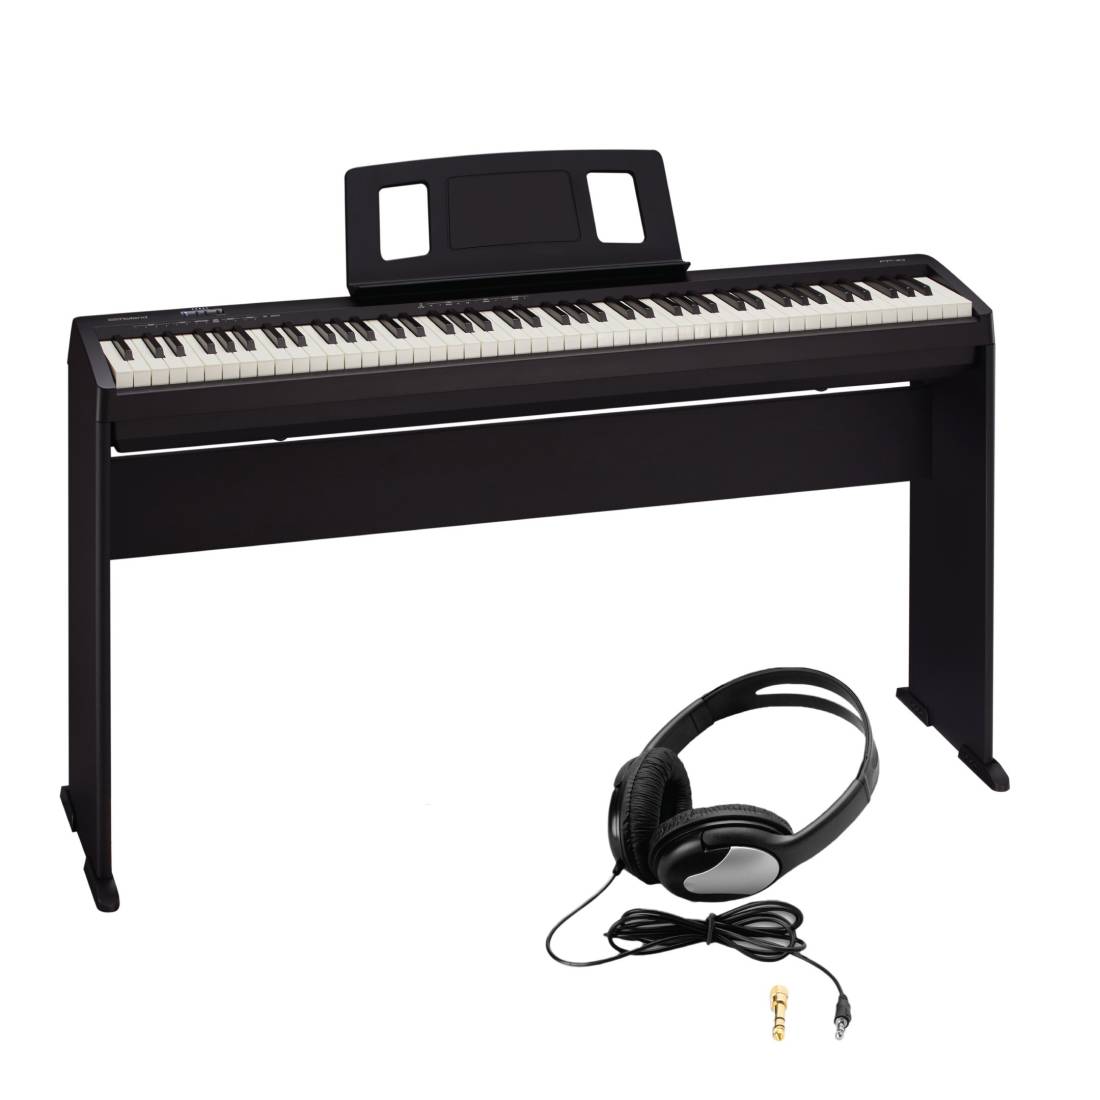 FP-10 Digital Piano with Stand and Headphones